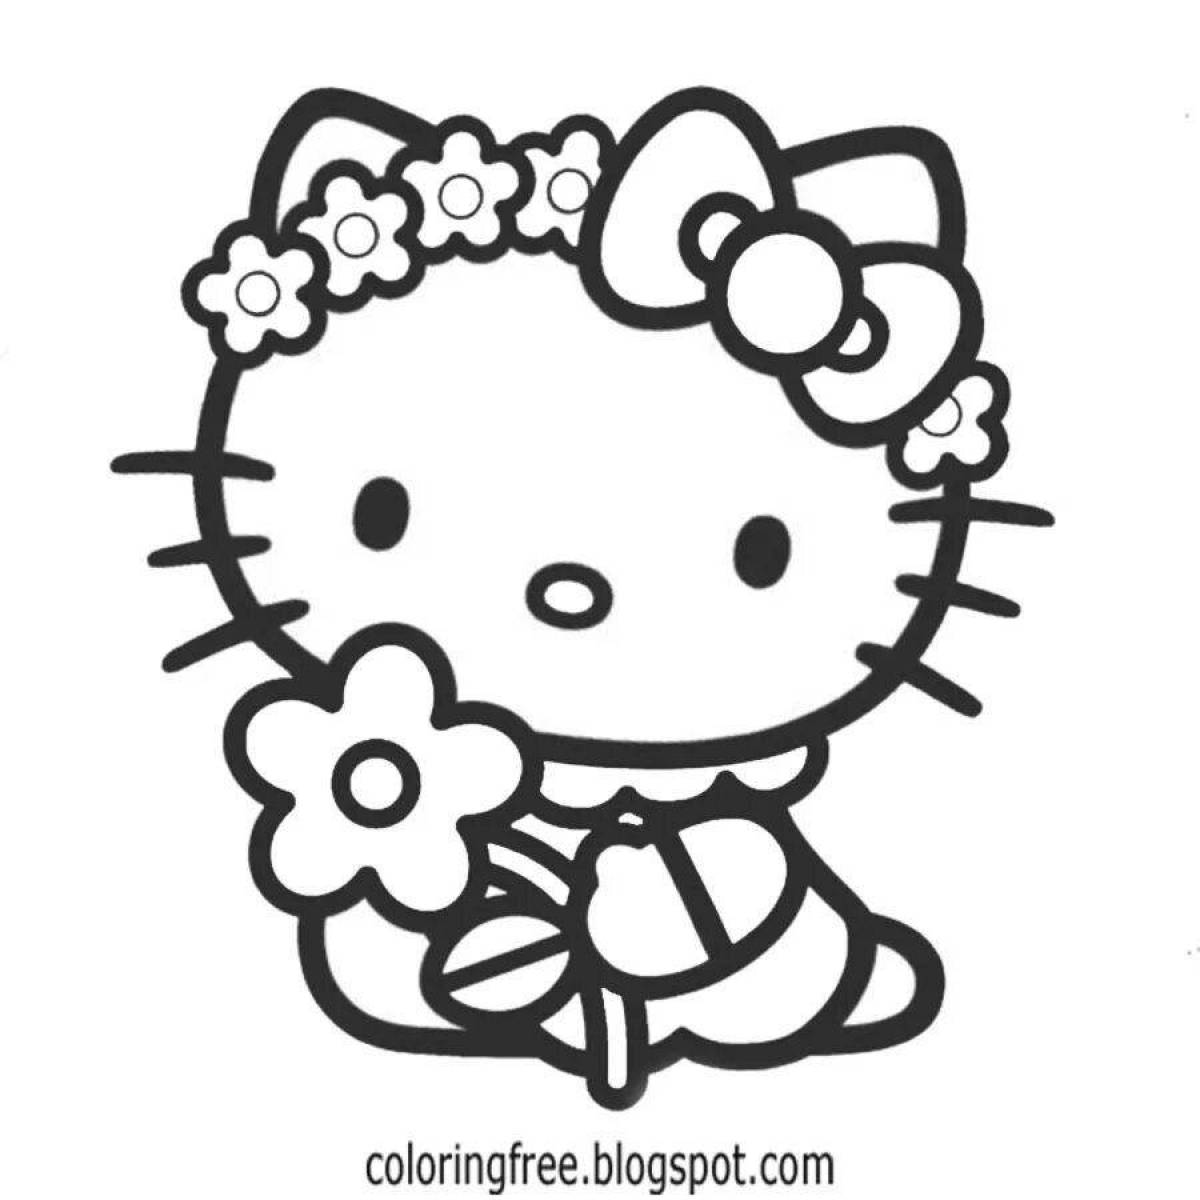 Shining coloring hello kitty, black and white